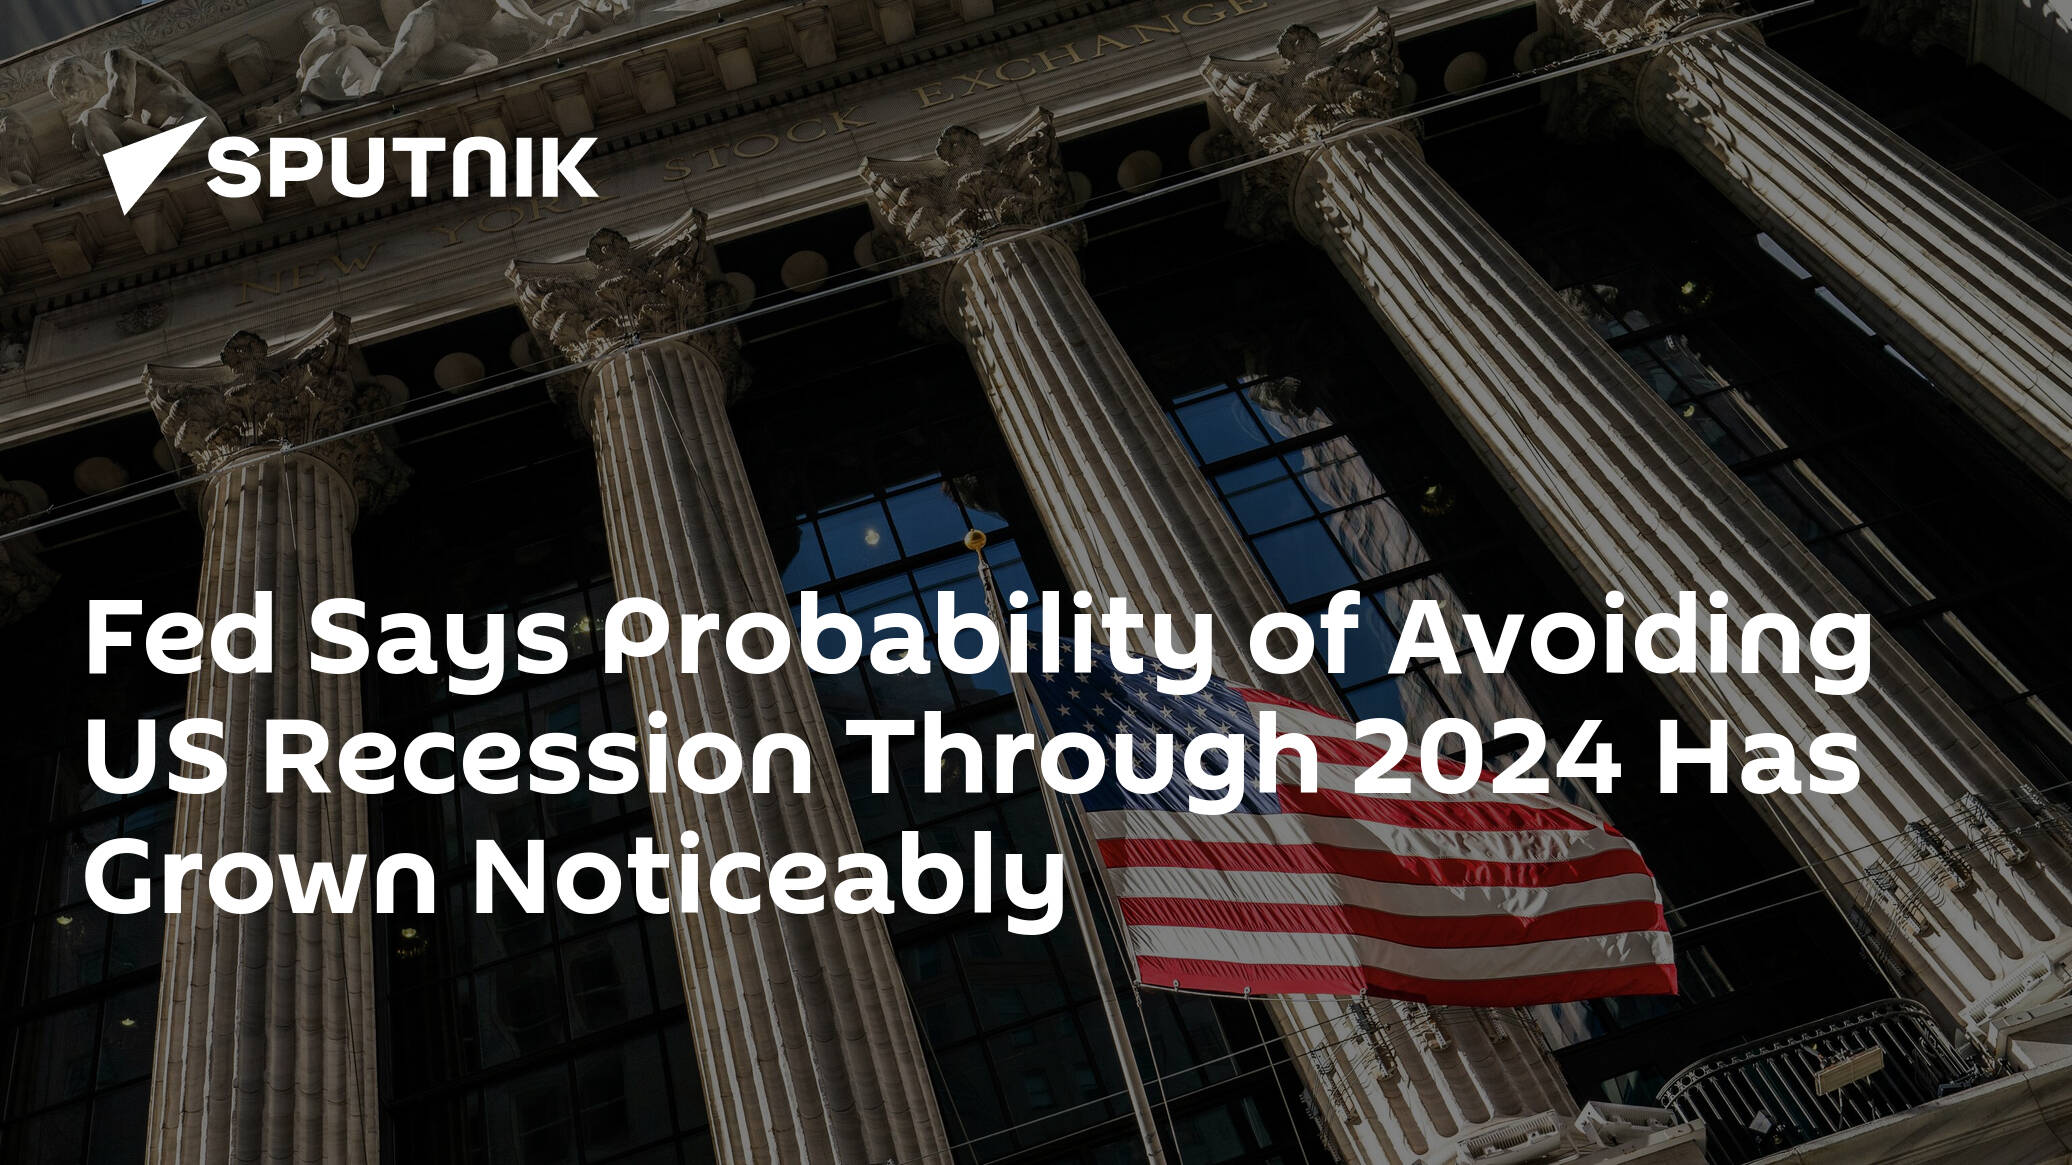 Fed Says Probability of Avoiding US Recession Through 2024 Has Grown Noticeably